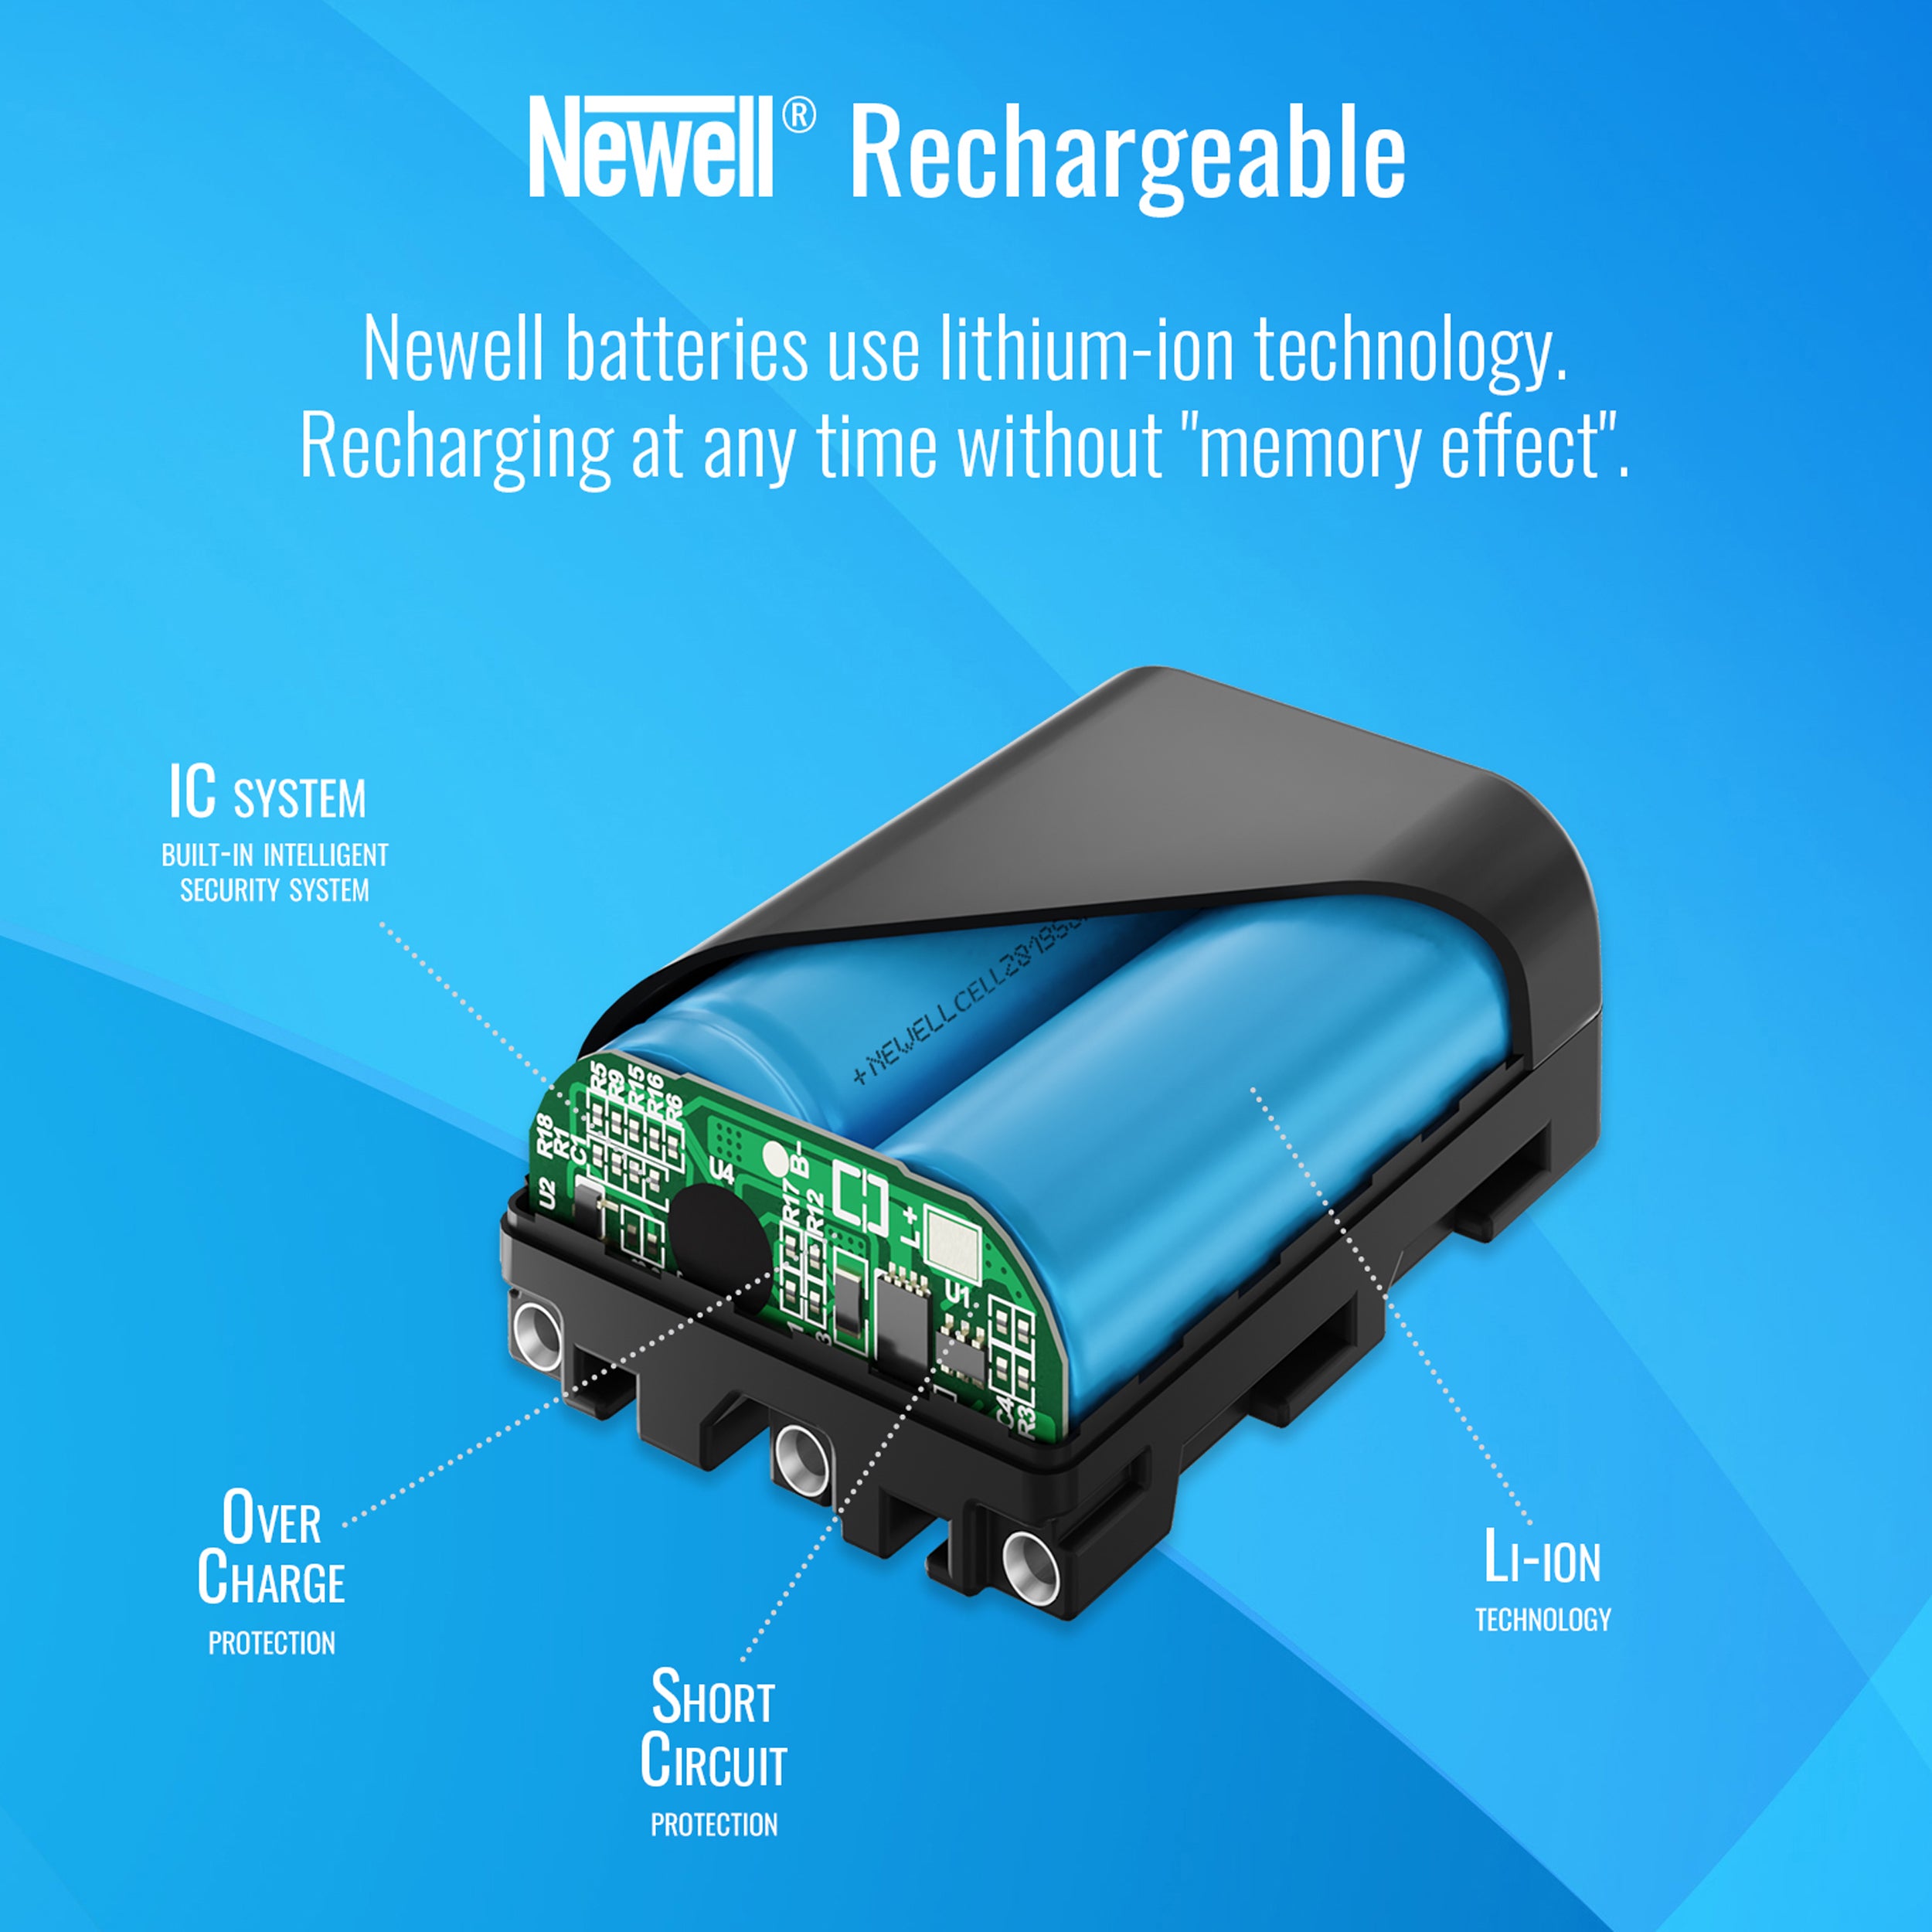 Newell rechargeable battery NP-F970 micro USB